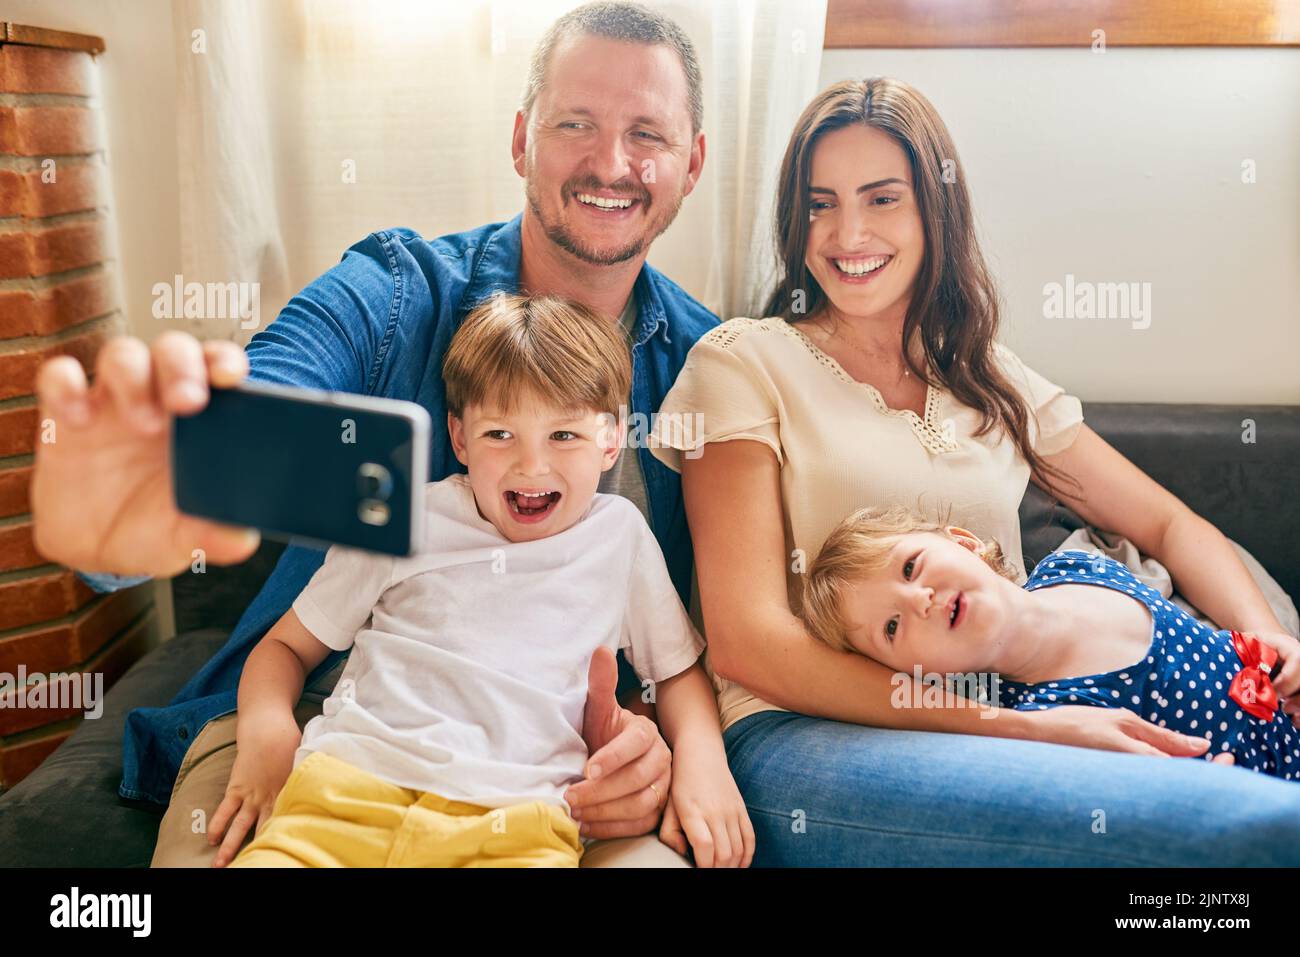 Make every family moment memorable. a happy young family taking a selfie together on the sofa at home. Stock Photo